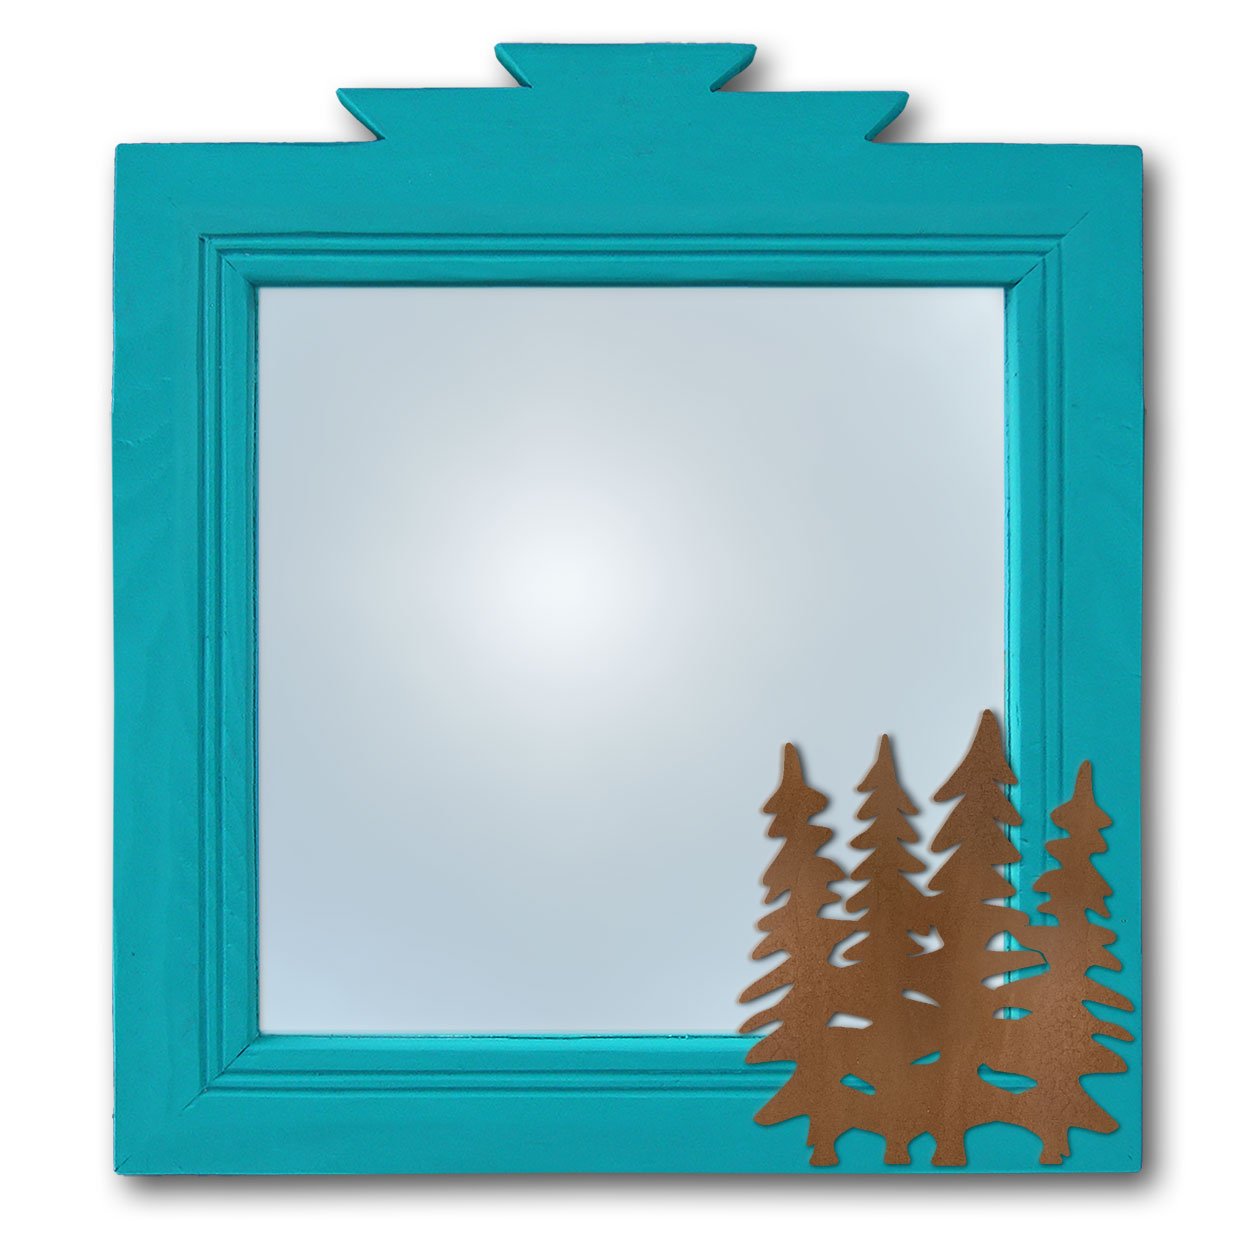 600032 - 17in Pine Trees Lodge Turquoise Pine Accent Wall Mirror